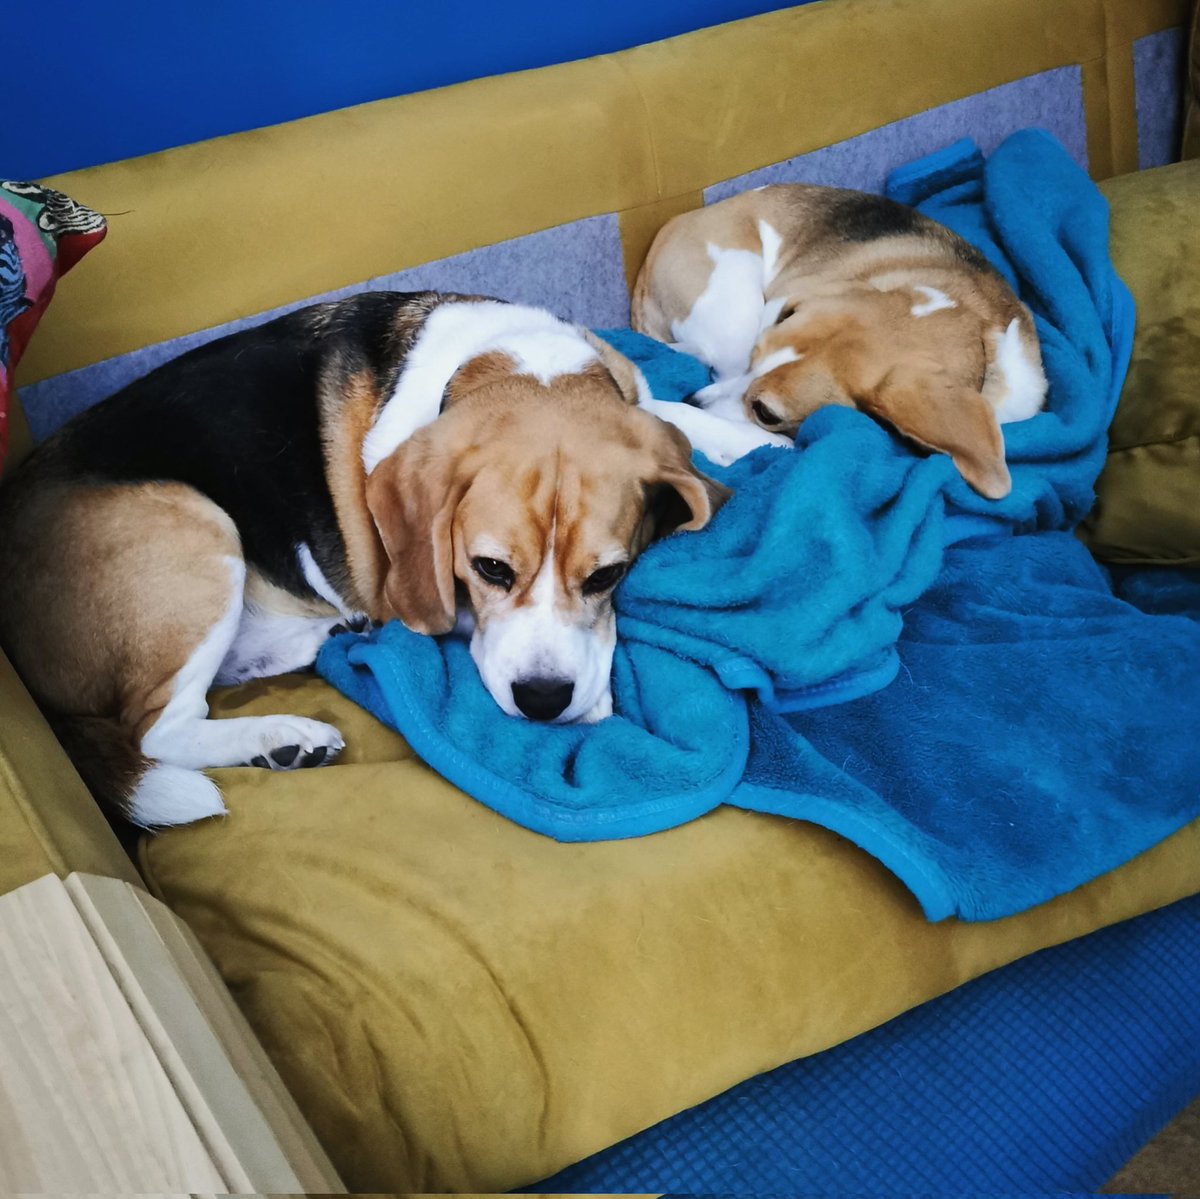 🐶 'Rio pulled down the cushions and pulled up a blanket. Now that she's done the hard work I want in too!'

#Beagles #familypack #TwoDogHome #comfy #sofa #wednesdayVibes #WednesdayMotivation #GoodGirl #dudeswithdogs